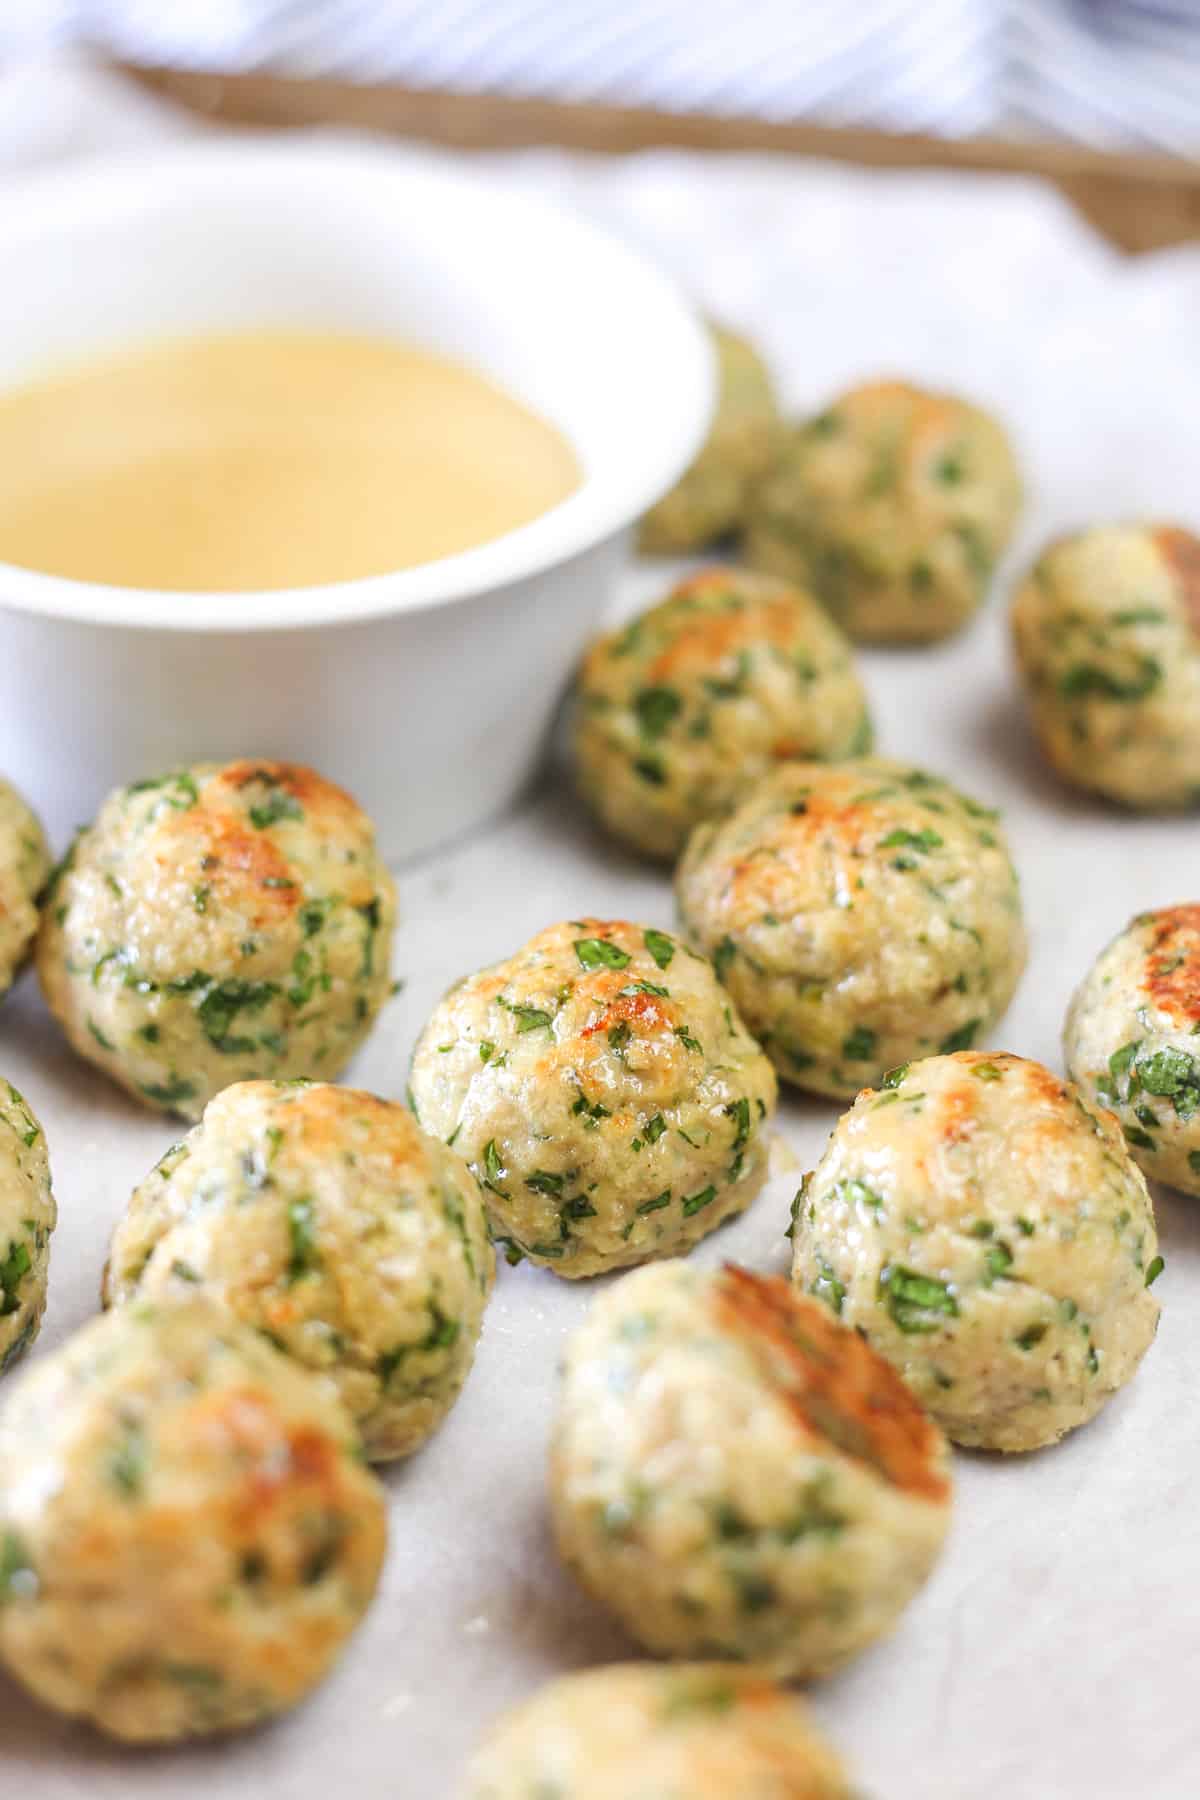 Chicken meatballs with herbs next to a bowl of honey mustard dipping sauce.